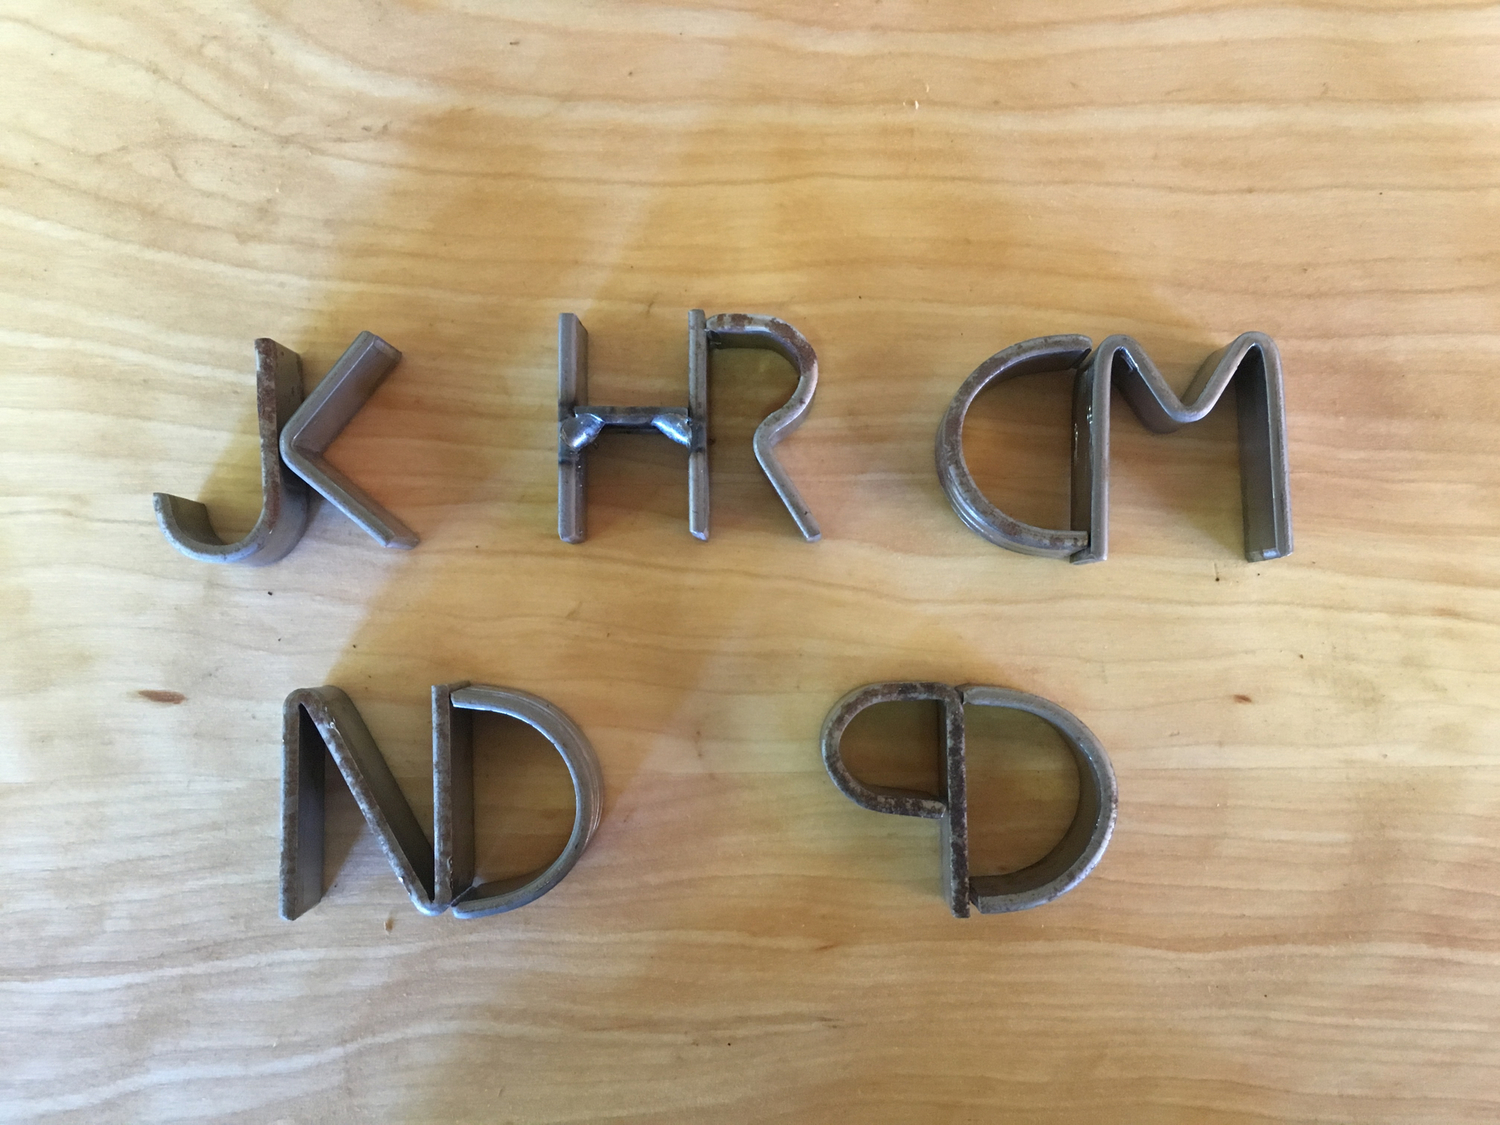 Branding Iron with joined letters — Sloan Brands